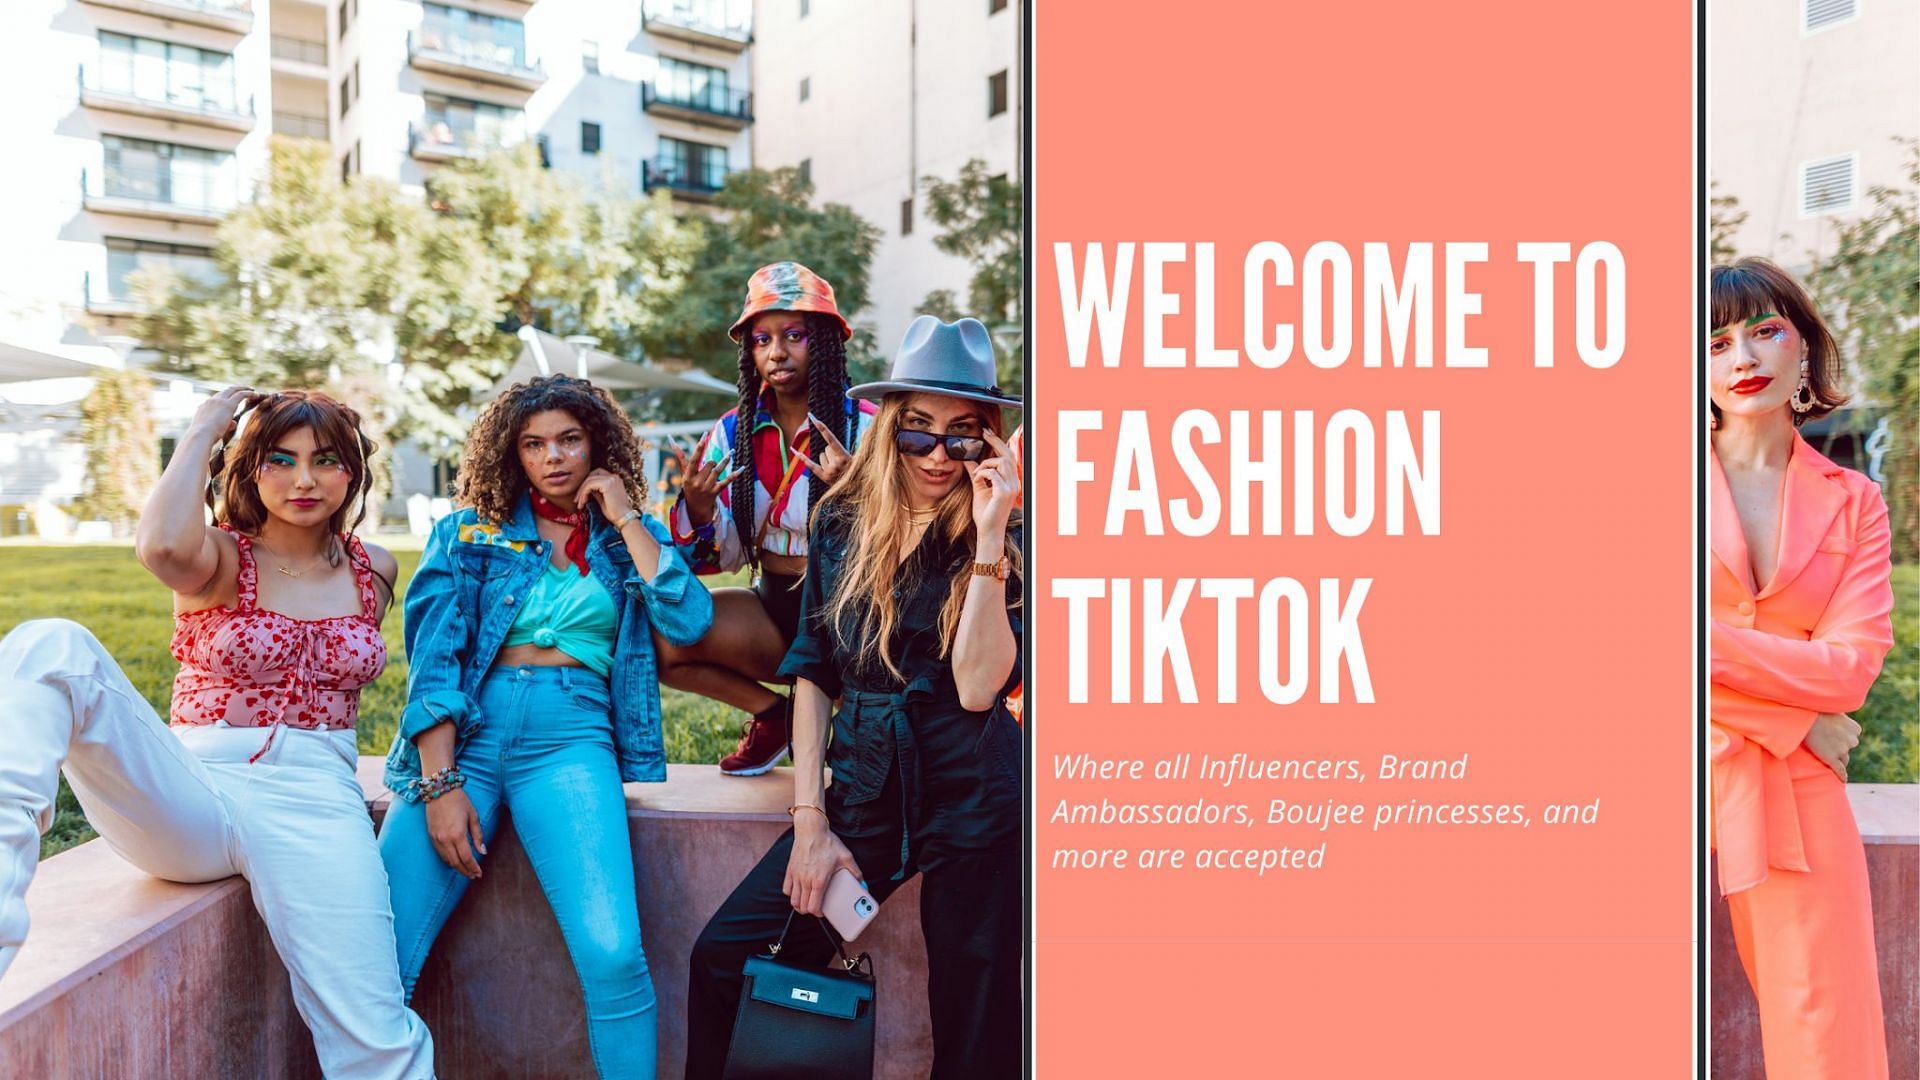 Tiktok fashion influencers hold quite the sway today (Image by Style Crisis)